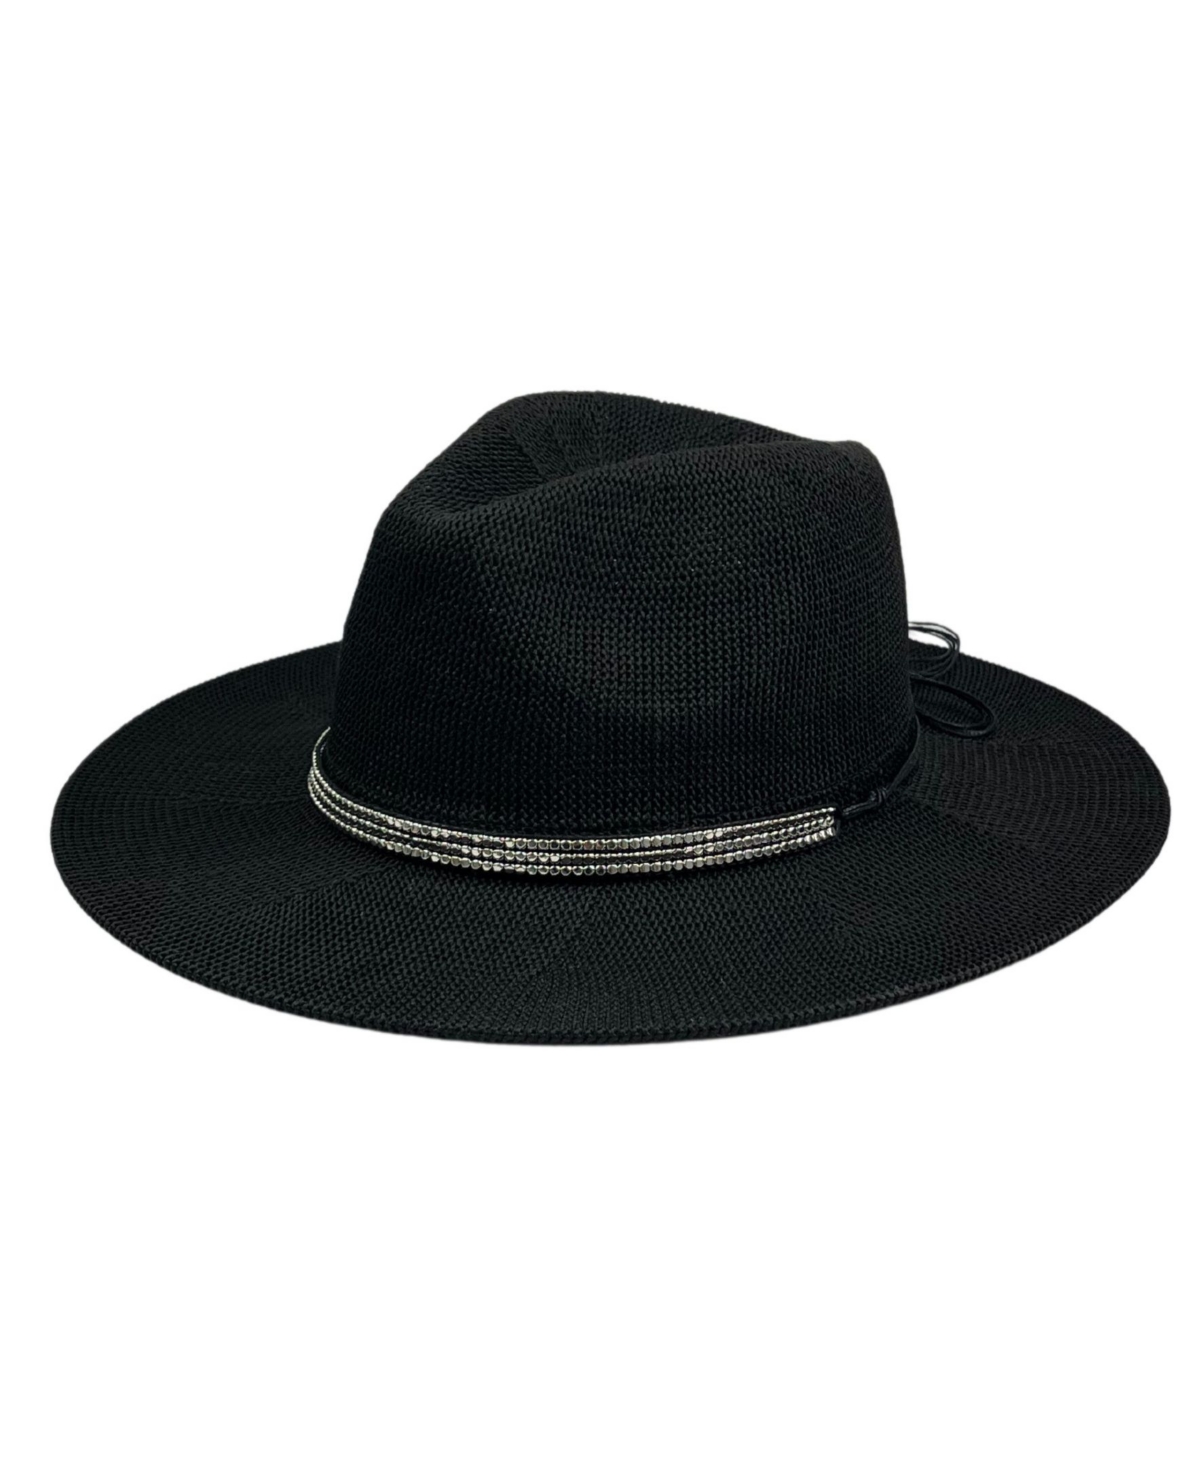 Marcus Adler Women's Packable Panama Hat With Beaded Trim In Black